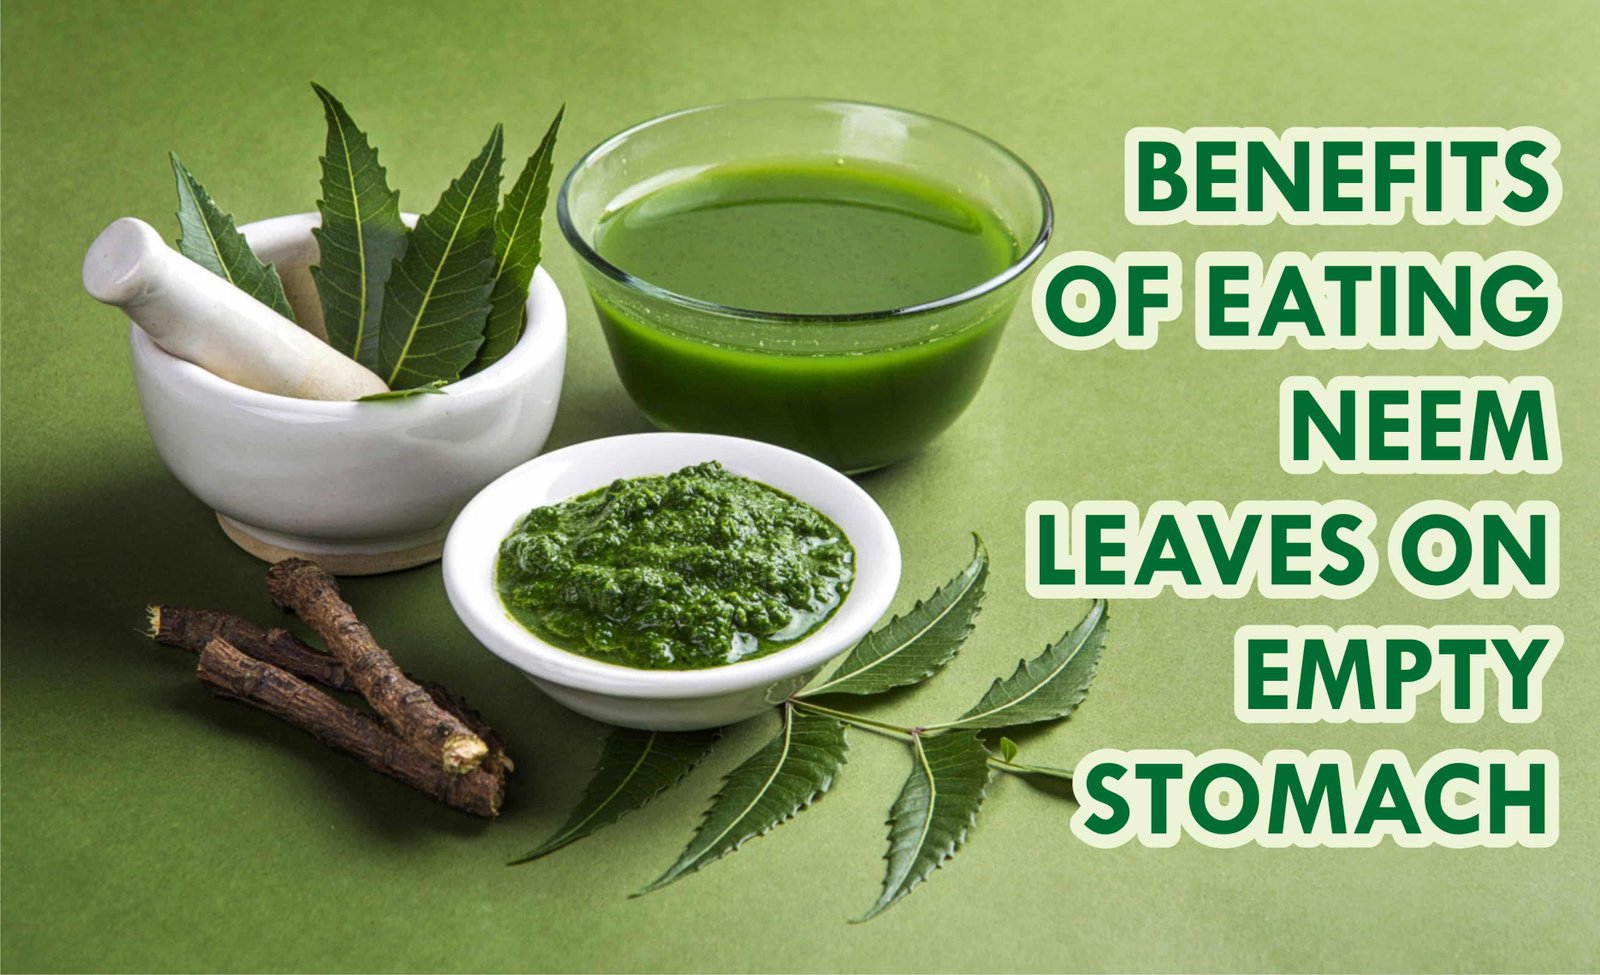 benefits of eating neem leaves on empty stomach